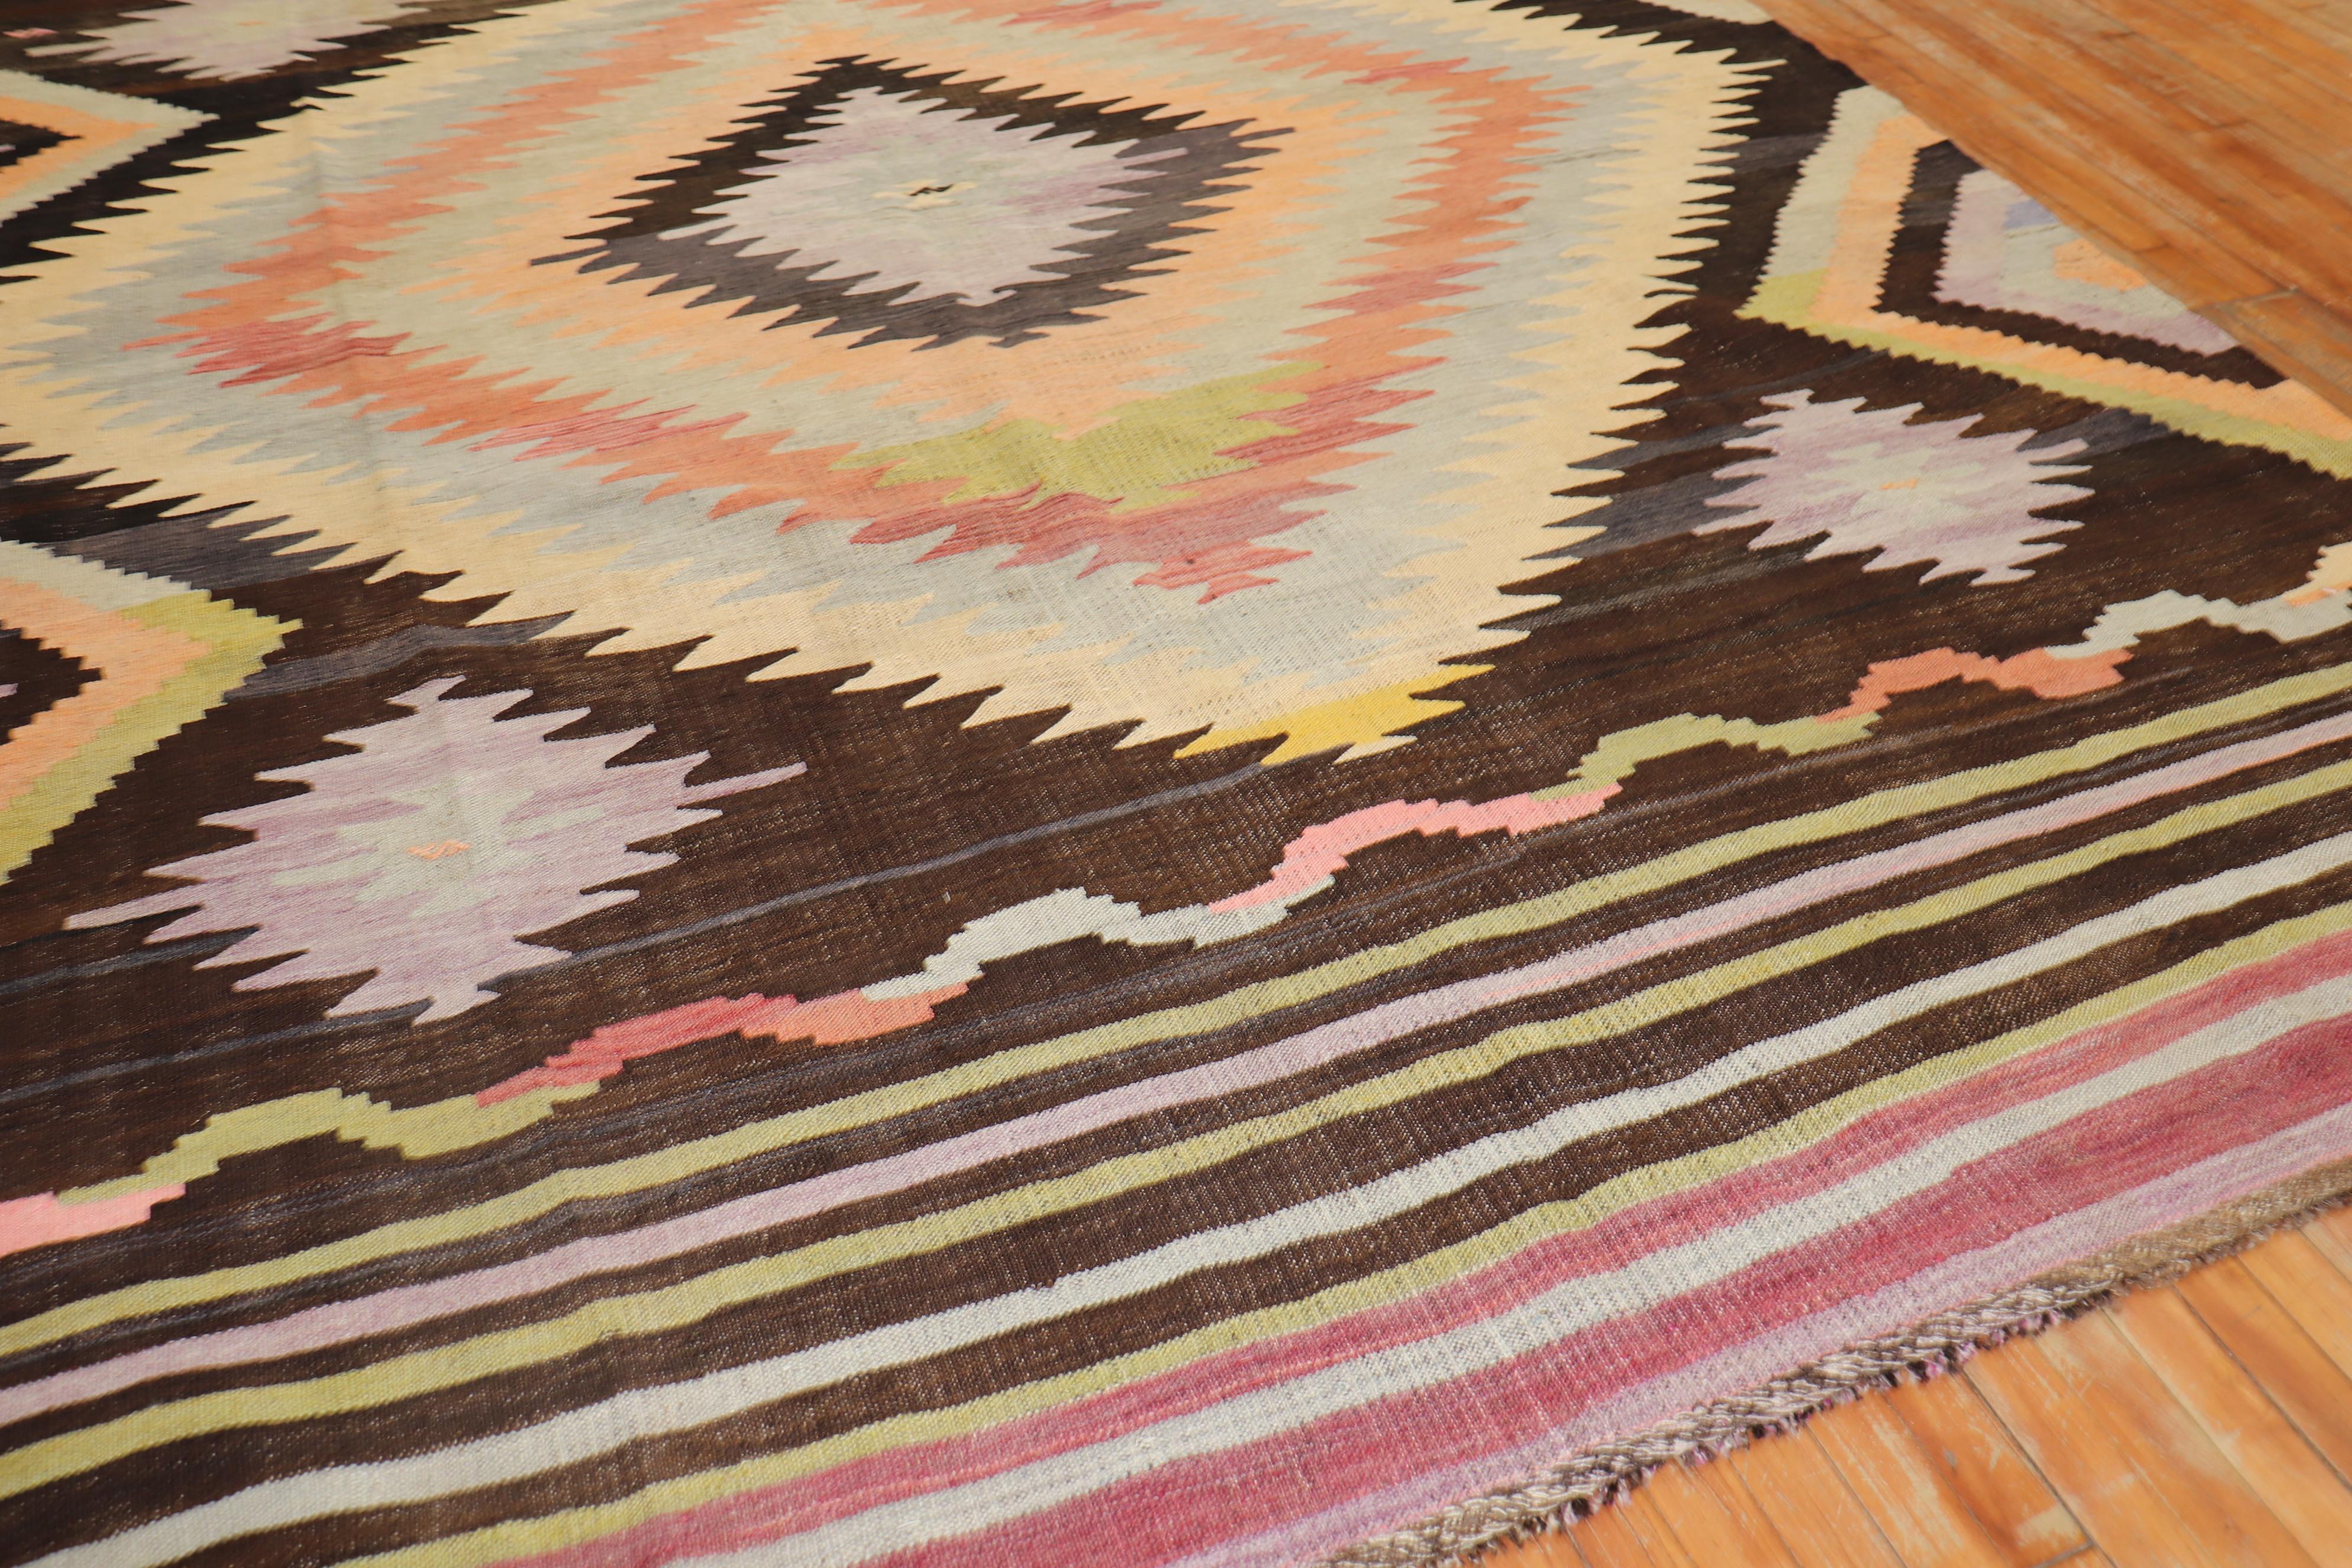 Room size Turkish Kilim from the mid-20th century. The field is brown, accents in canteloupe, peach, light green and lavender.

Measures: 8'4